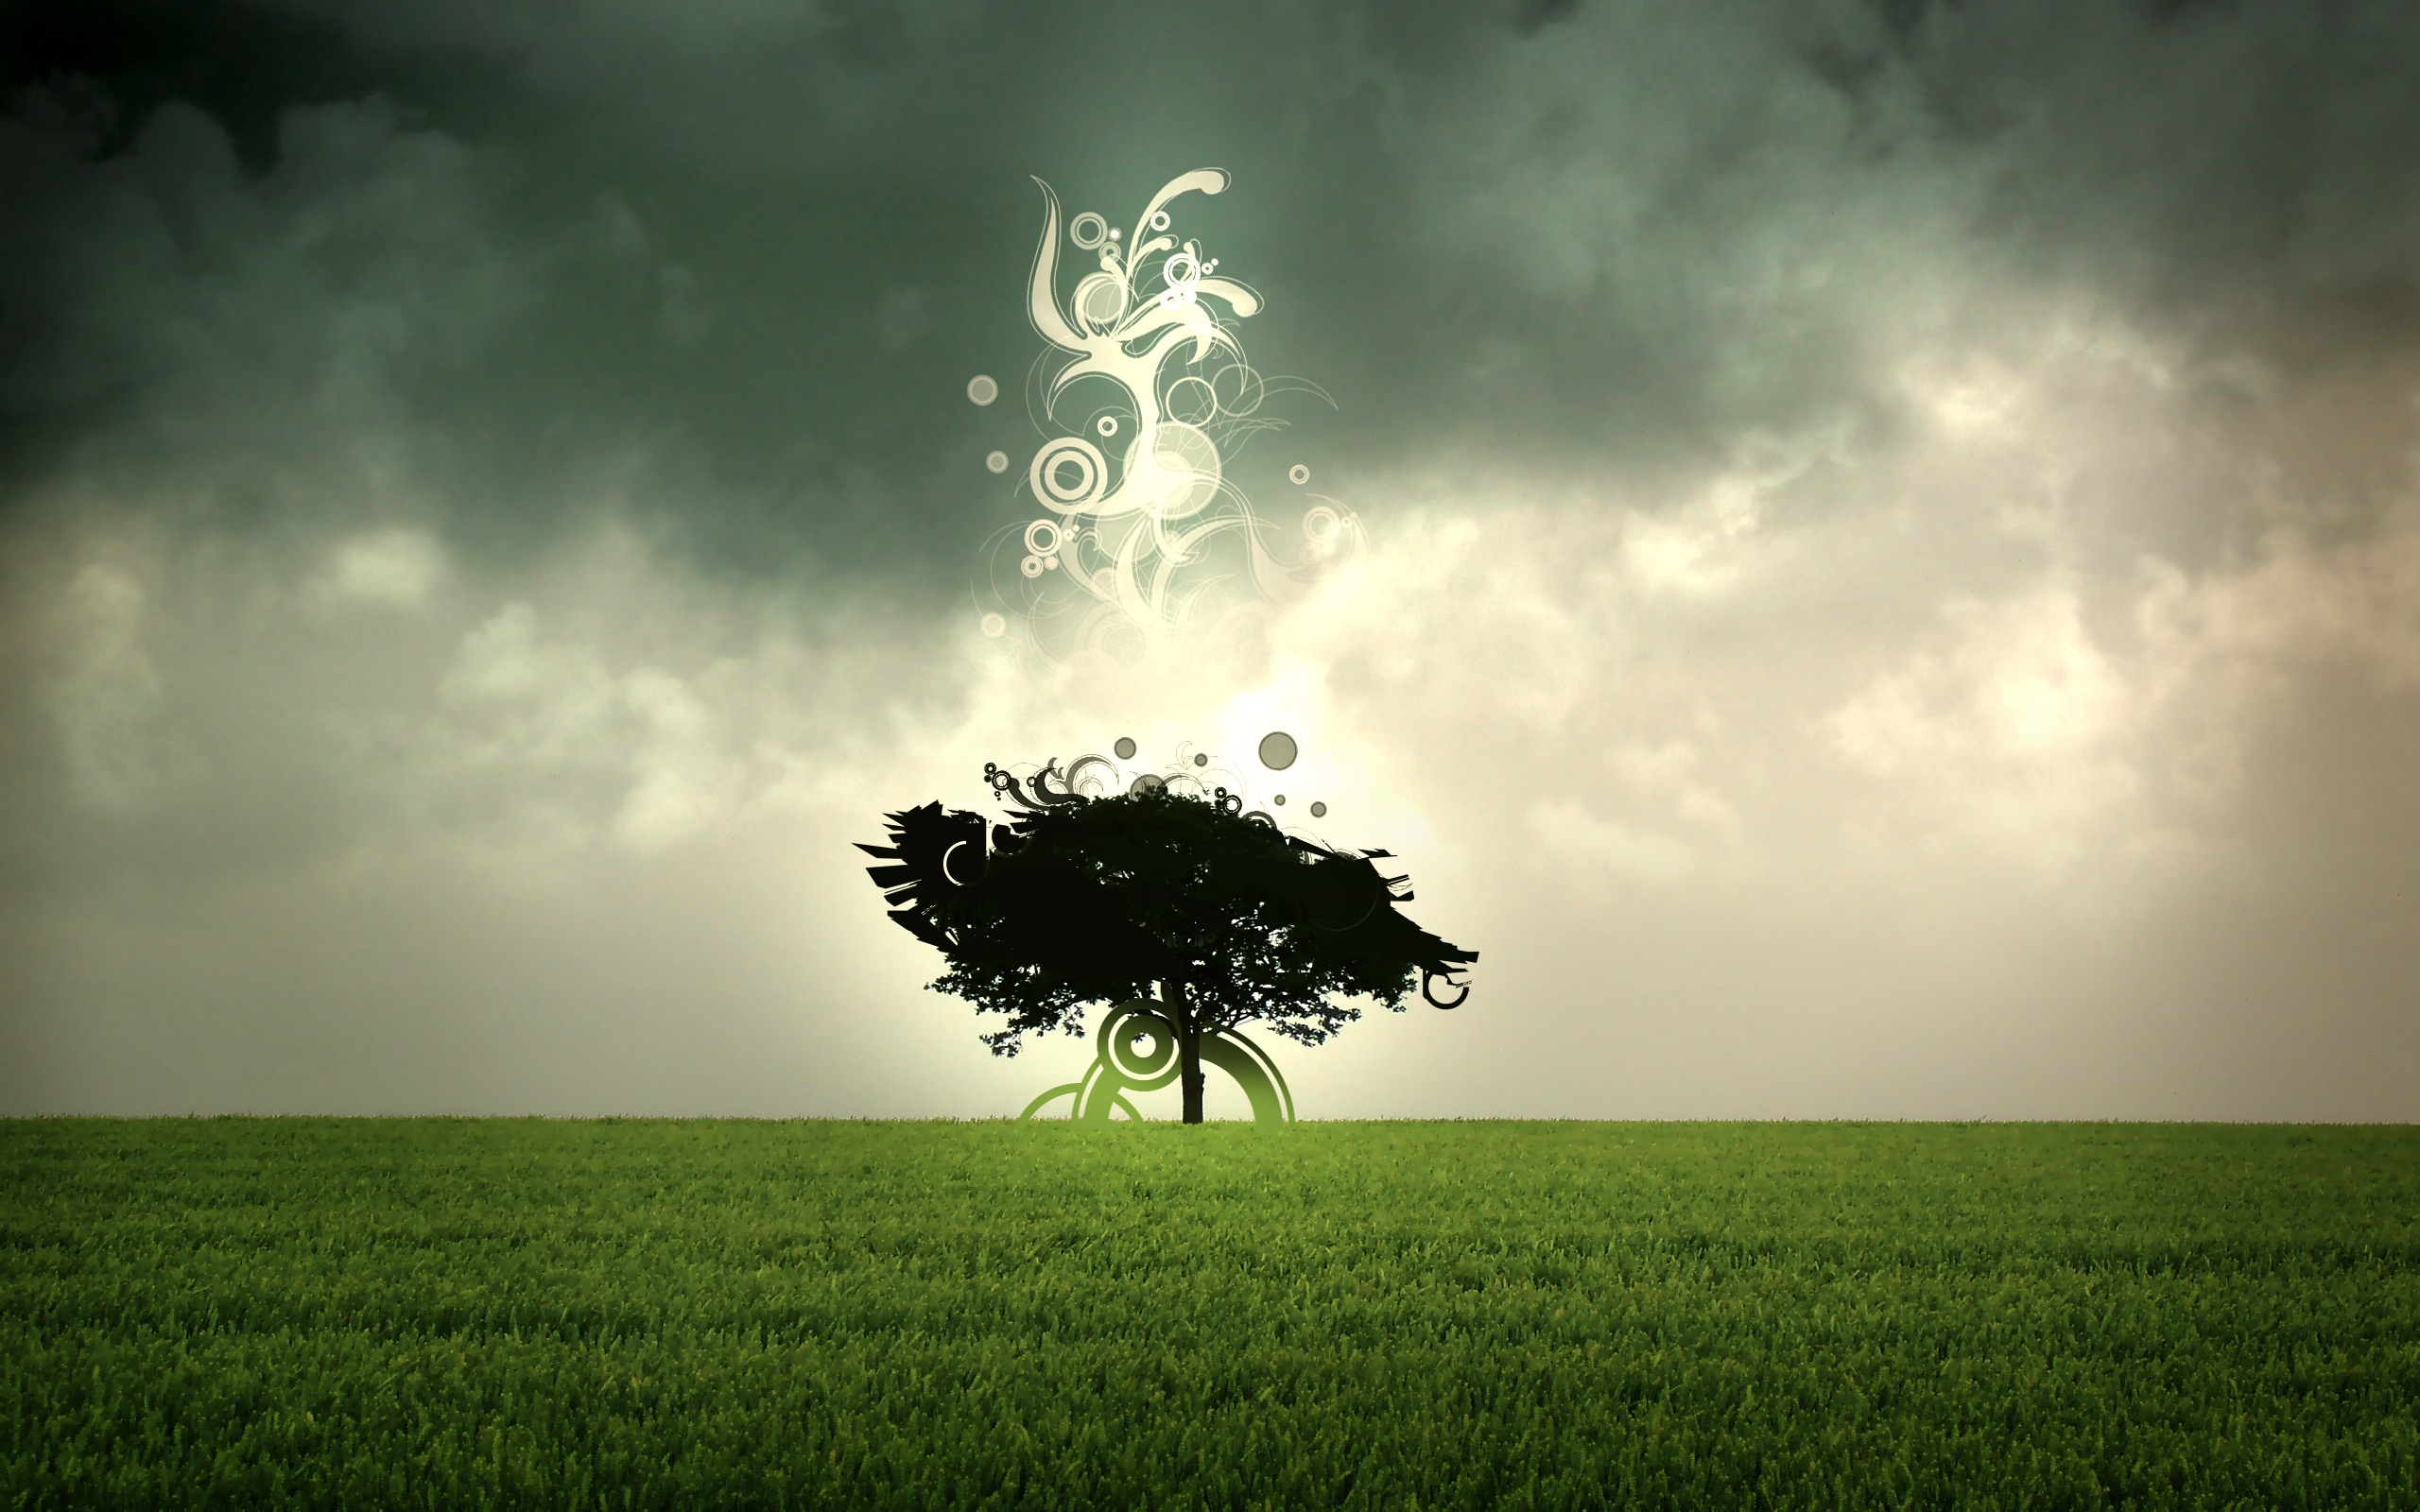 abstract, trees, grass, sacred, skyscapes, photo manipulation - desktop wallpaper